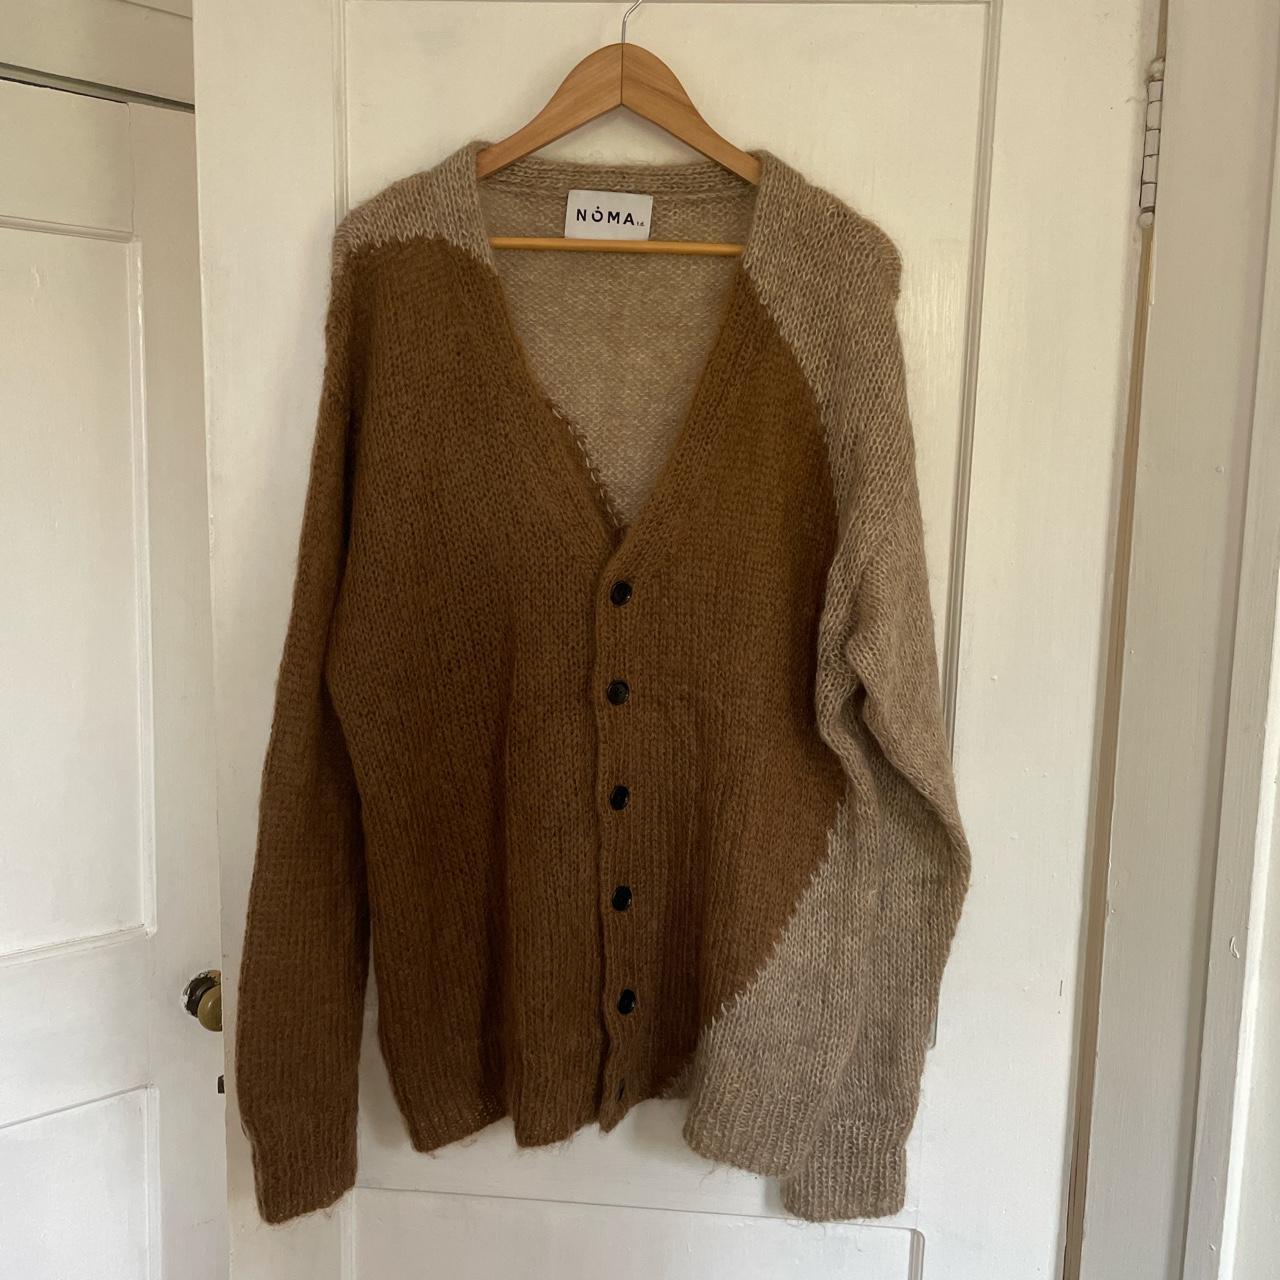 Noma t.d. Mohair hand knit cardigan. This is a...